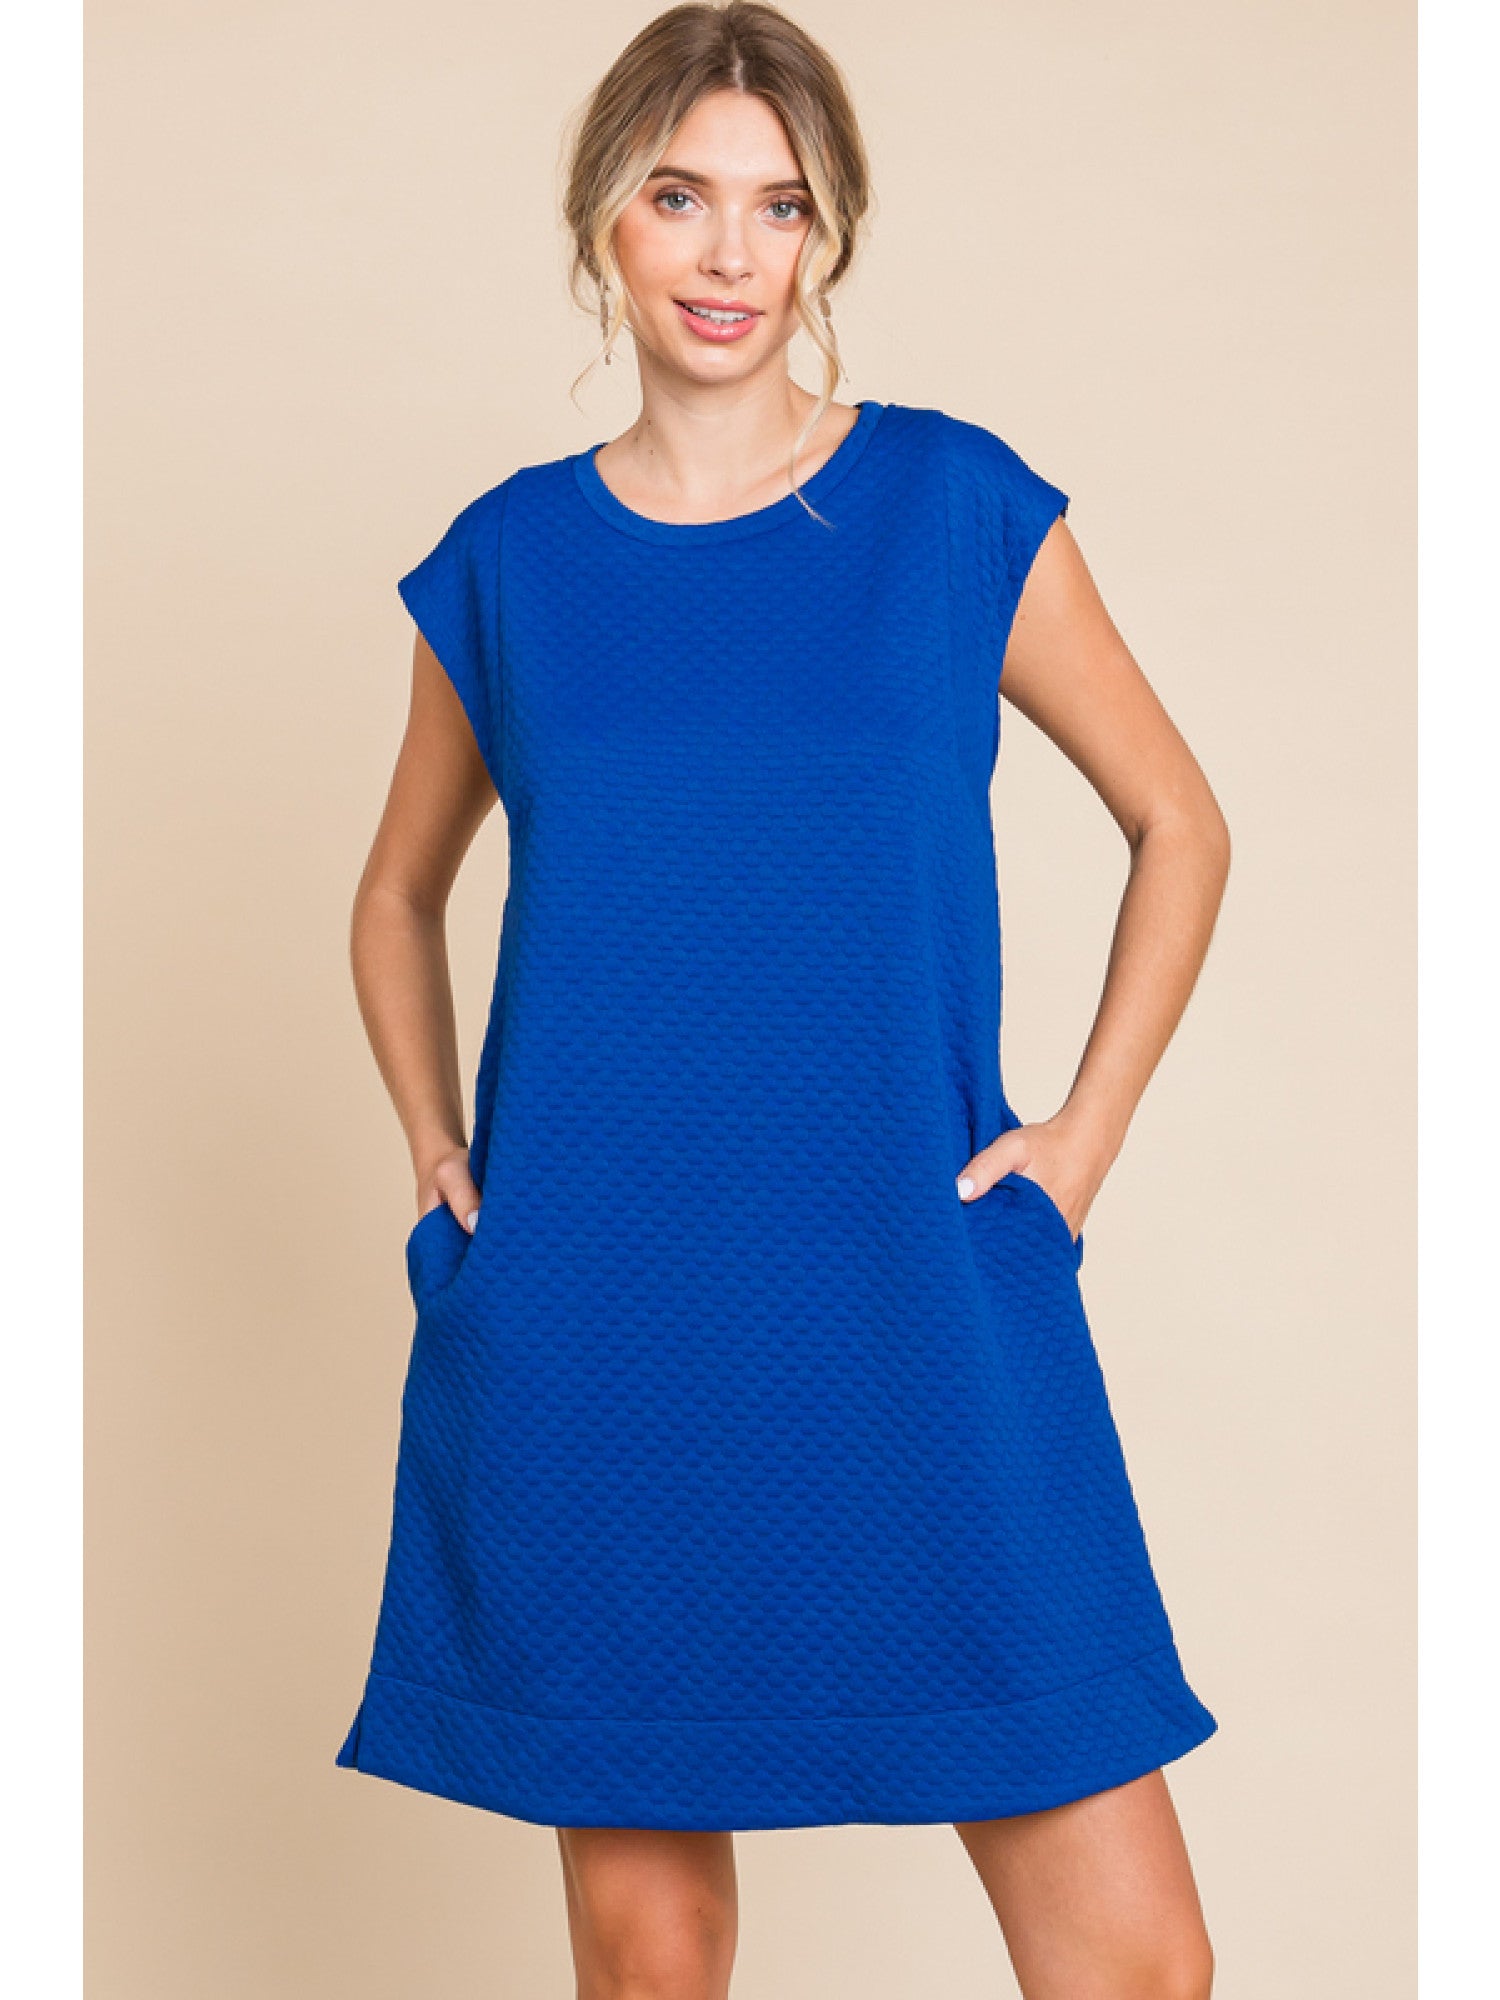 Amy Dress in Royal Blue